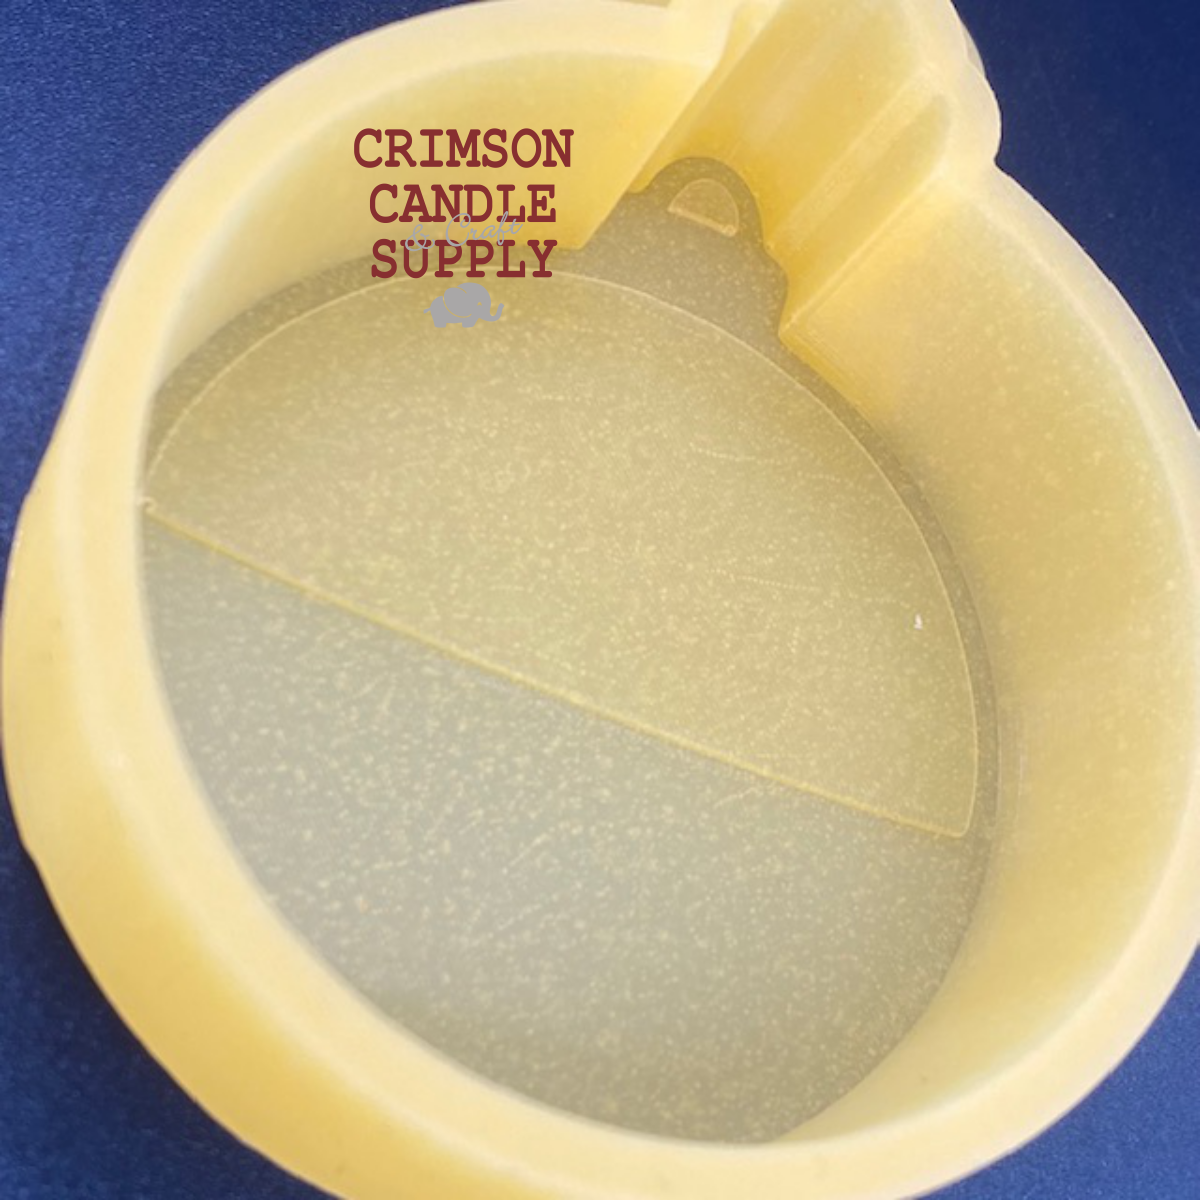 Fishing Bobber Silicone Mold 2.75” W x 3” T x 1 deep – Crimson Candle  Supply